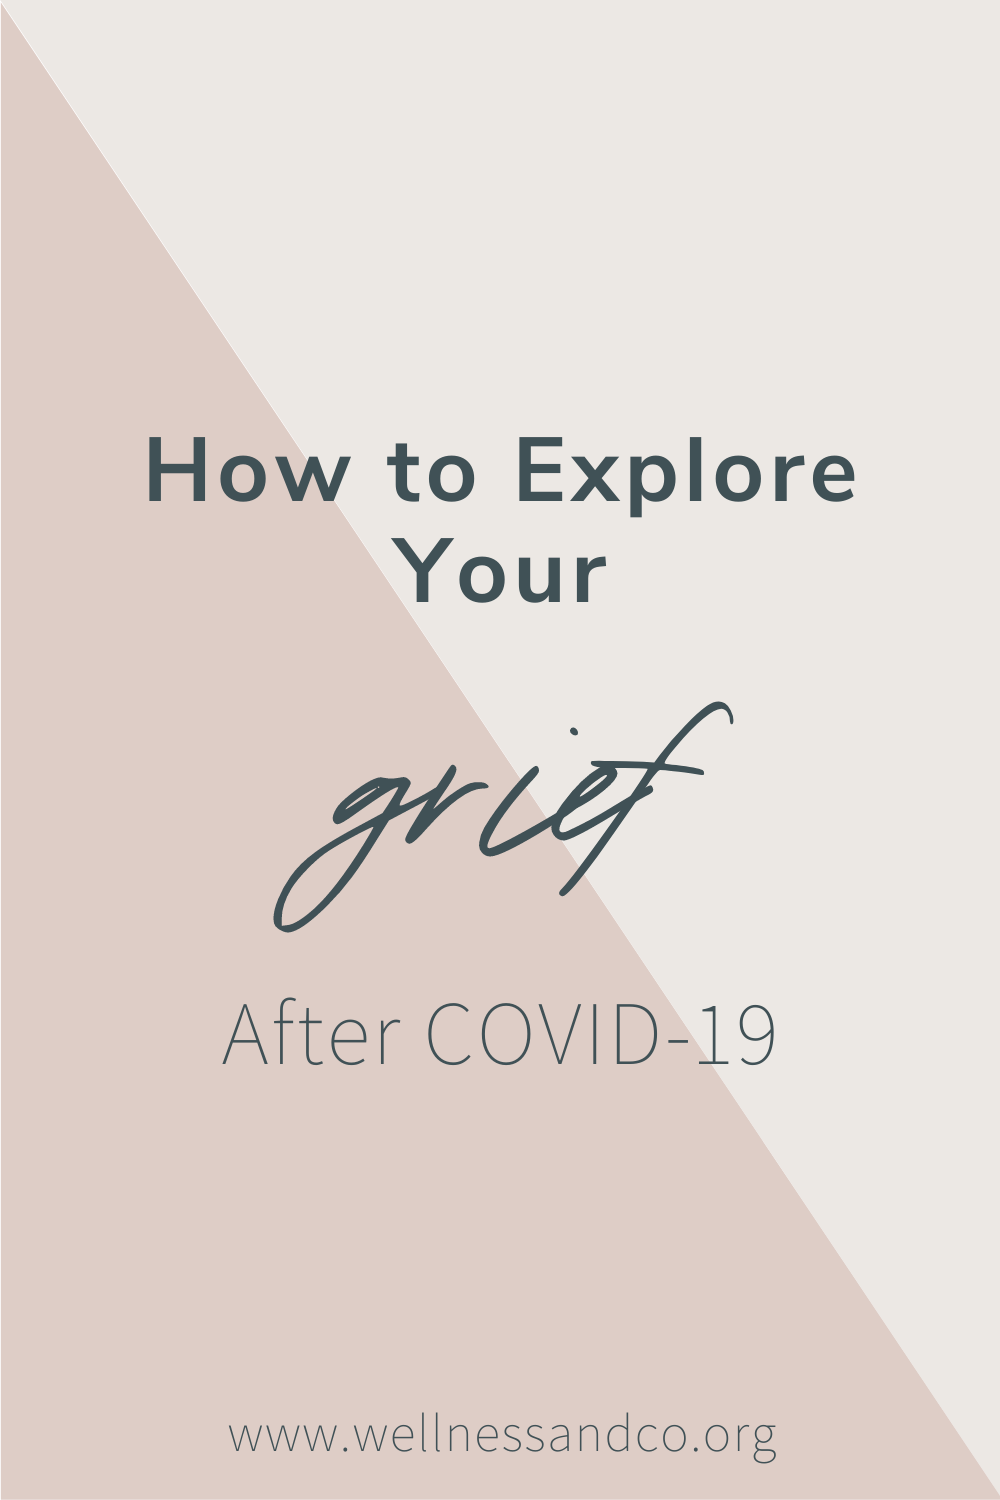 How To Explore Your Grief After COVID-19 | We've all been stuck inside for quite some time. Maybe we need to finally get out a good cry. For many of us, shutting down emotion to survive was necessary. But now is the time to lean in and release. This blog will give you a deeper look into how you can channel emotion to start the grieving process, cheers!